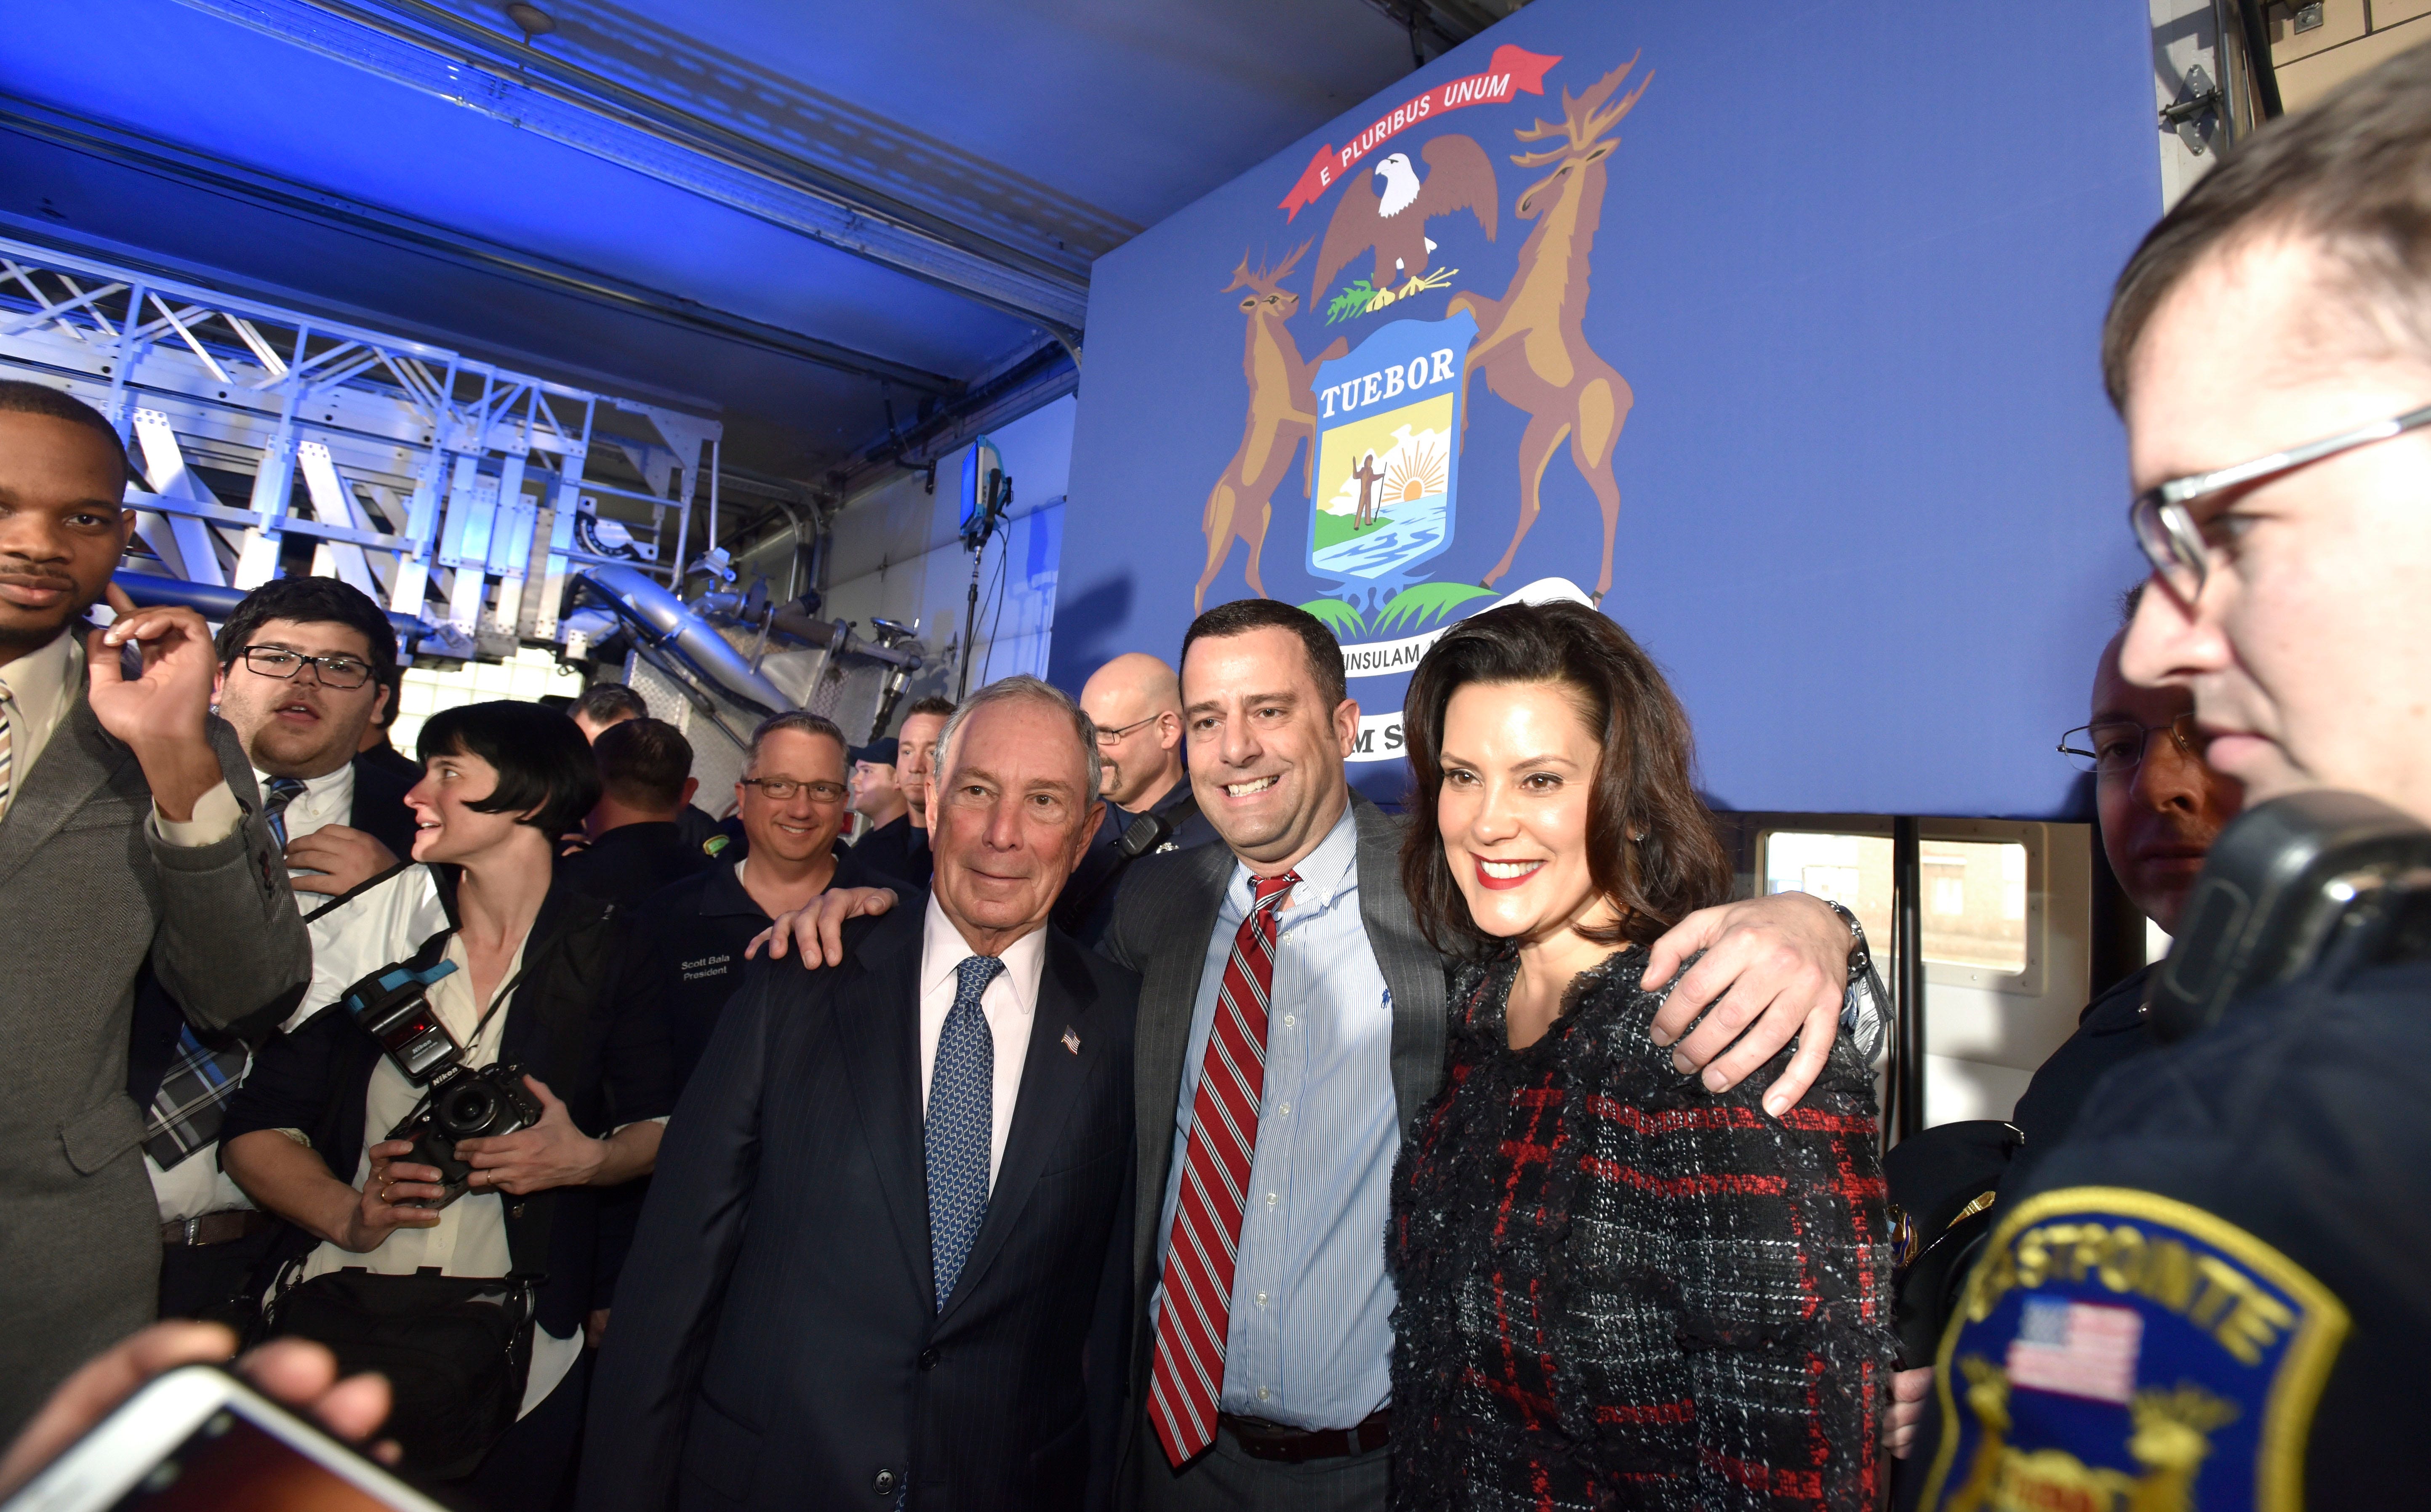 Former City of New York Mayor Michael Bloomberg, left, and Michigan Governor Gretchen Whitmer, right, take pictures with attendees after the press conference.